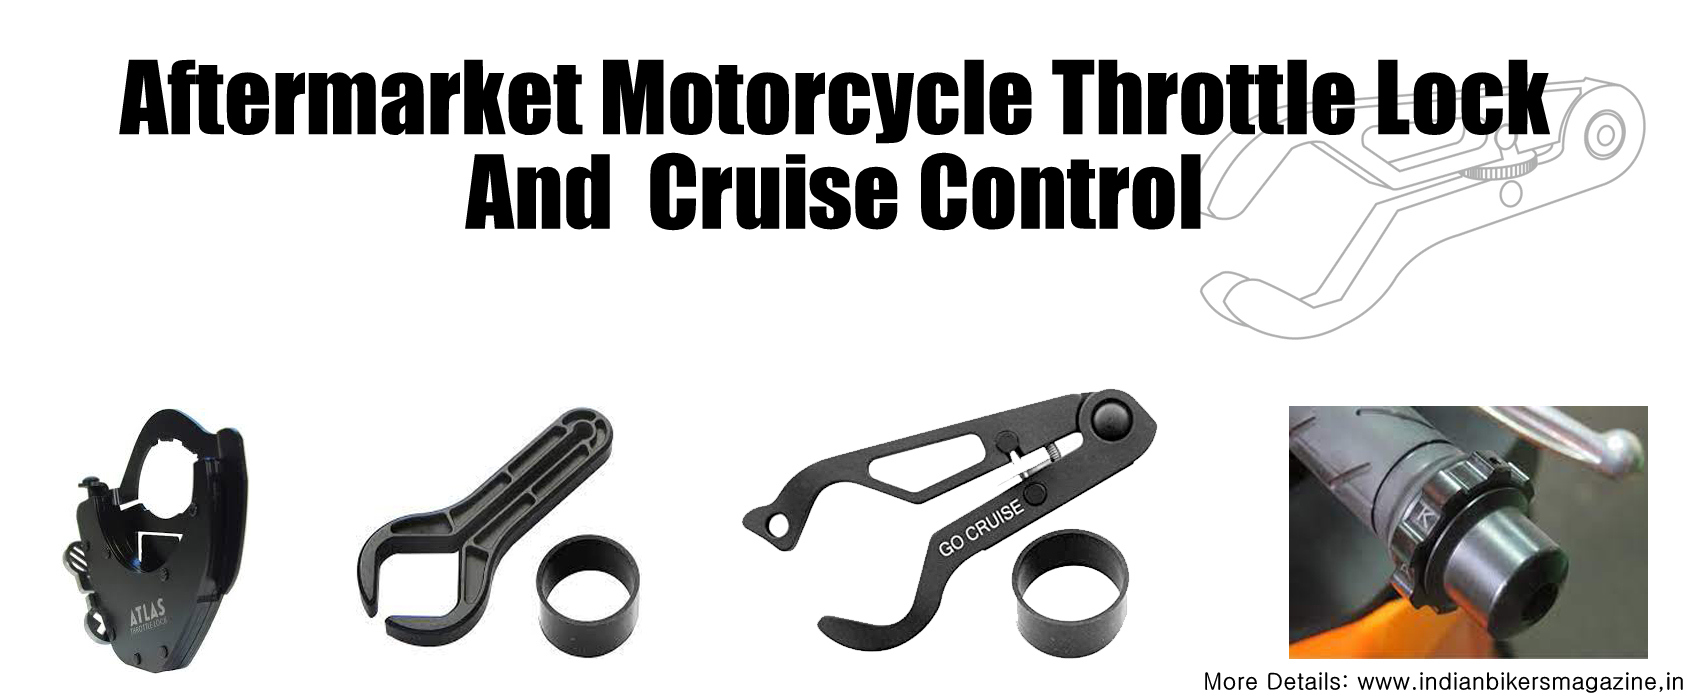 Aftermarket Motorcycle Throttle Lock And Cruise Control | Uses, Advantages